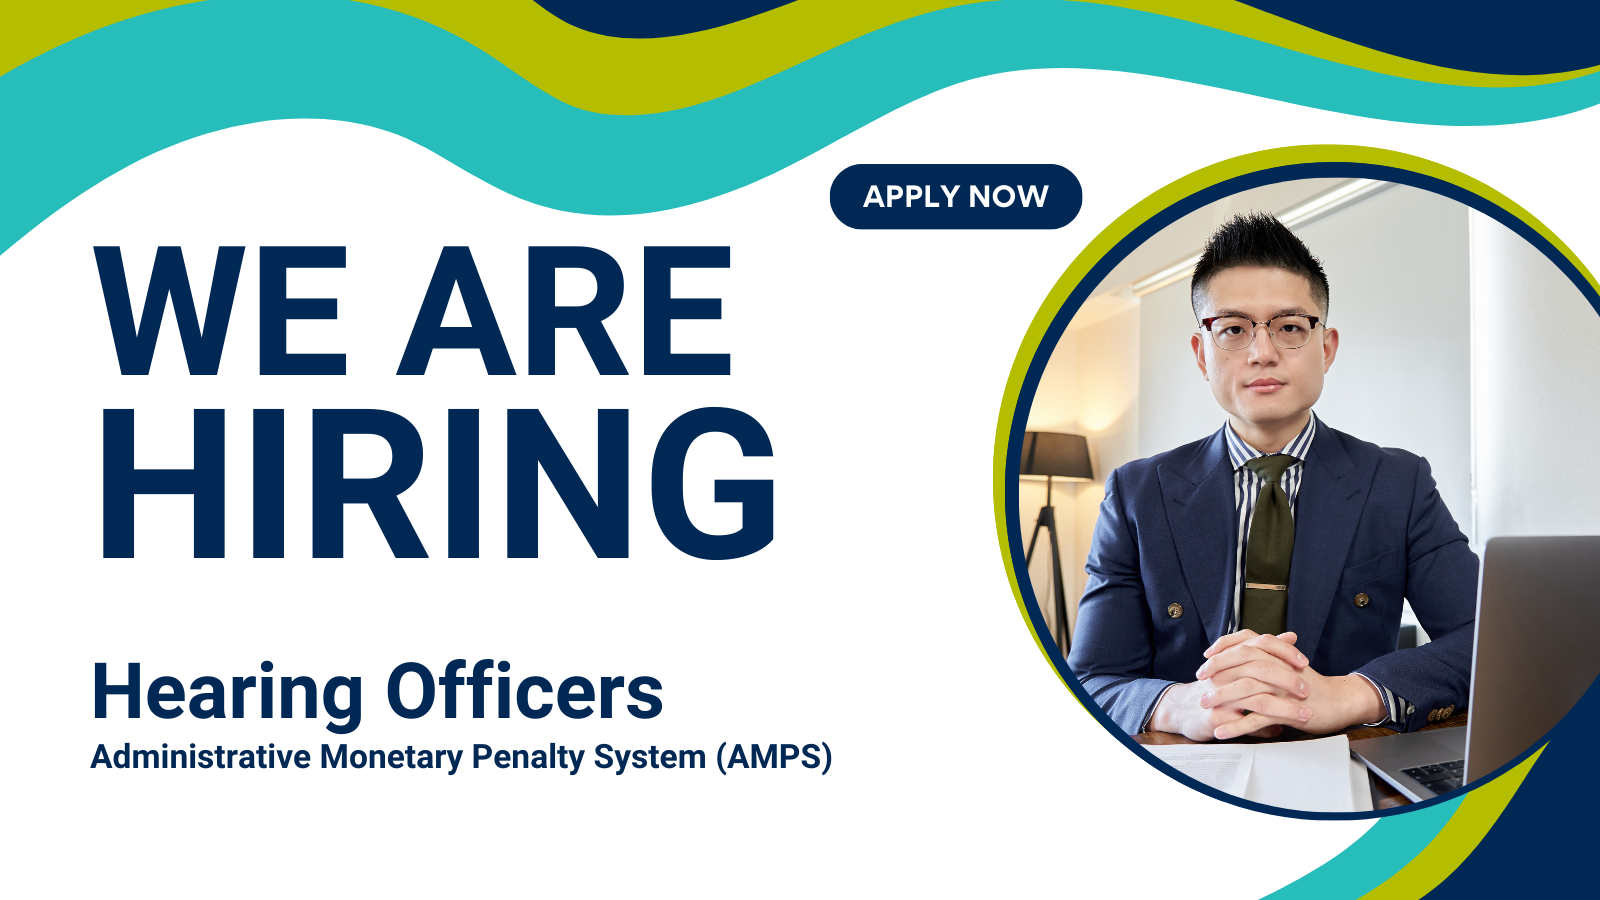 We are hiring hearing officers - apply now - image of man sitting at a desk